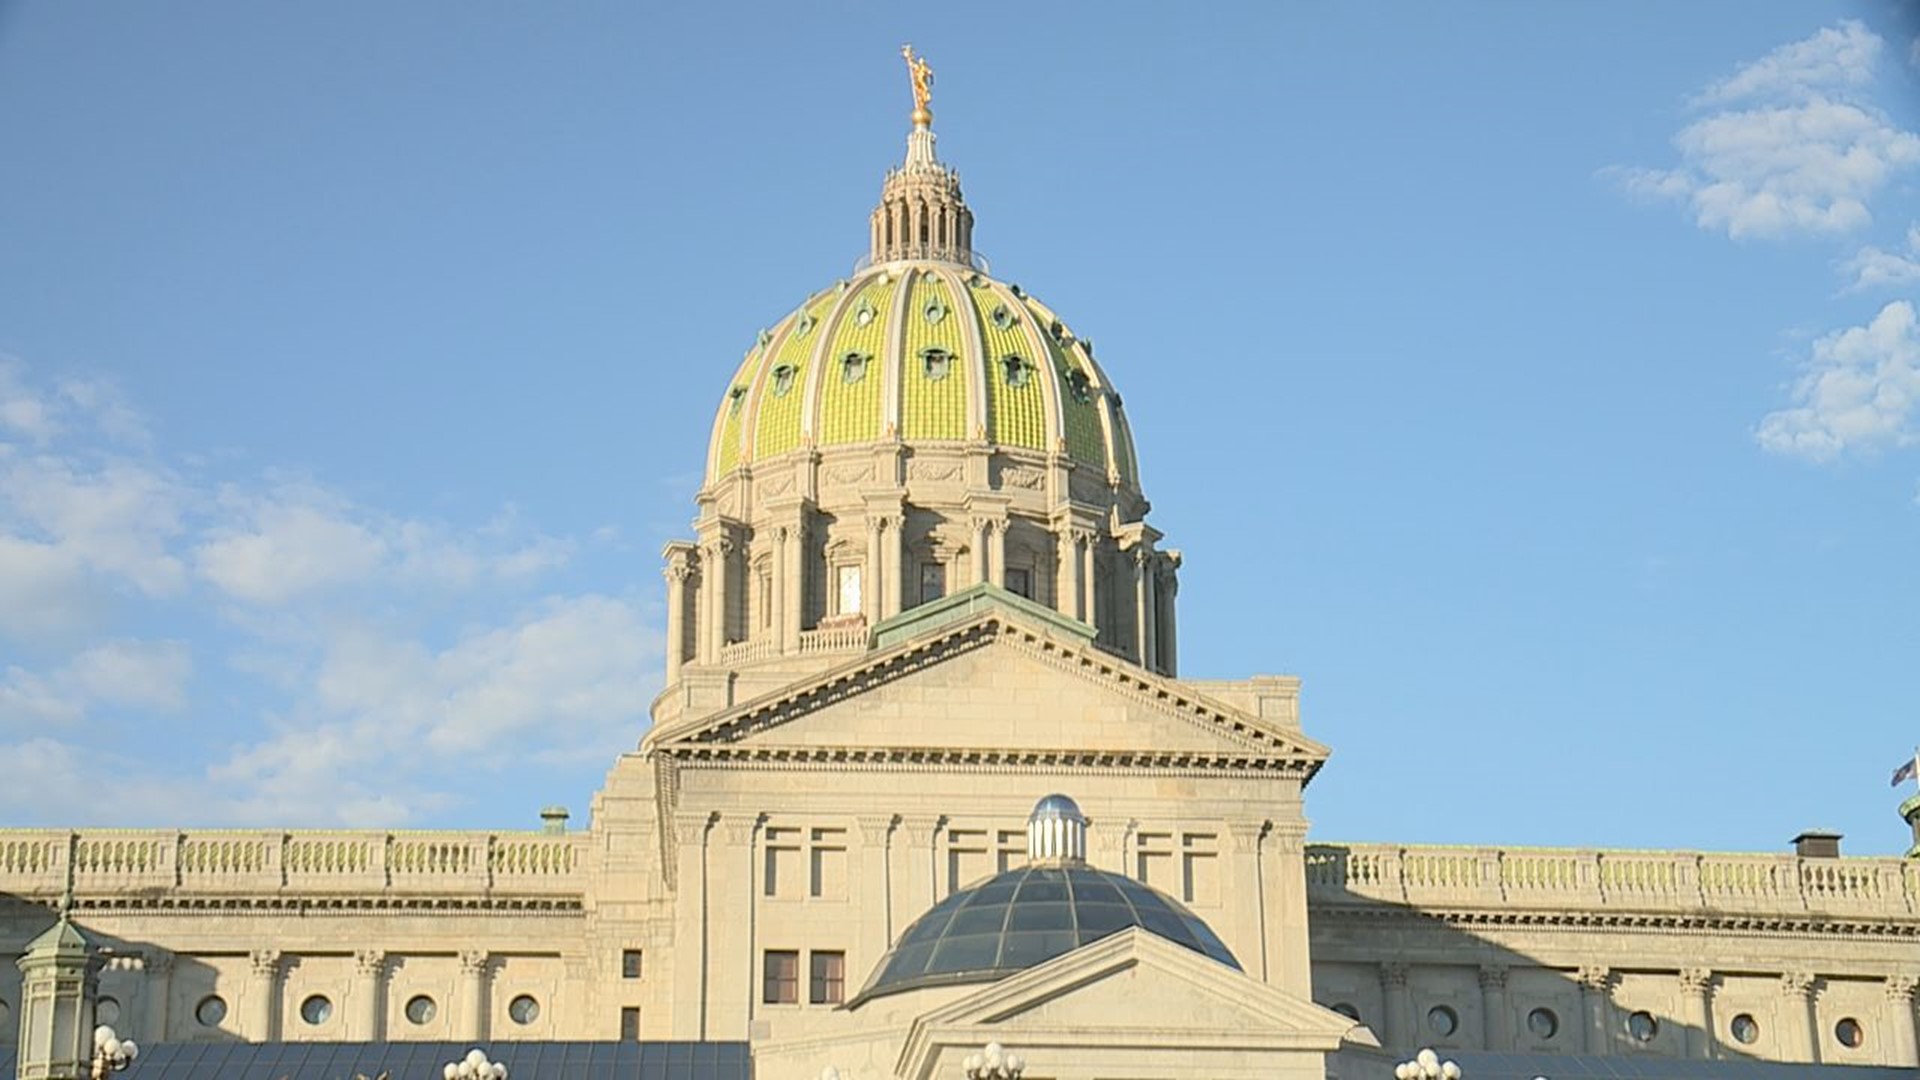 Nearly 20 percent of the 100 laws signed by Governor Wolf are to rename roads and bridges.